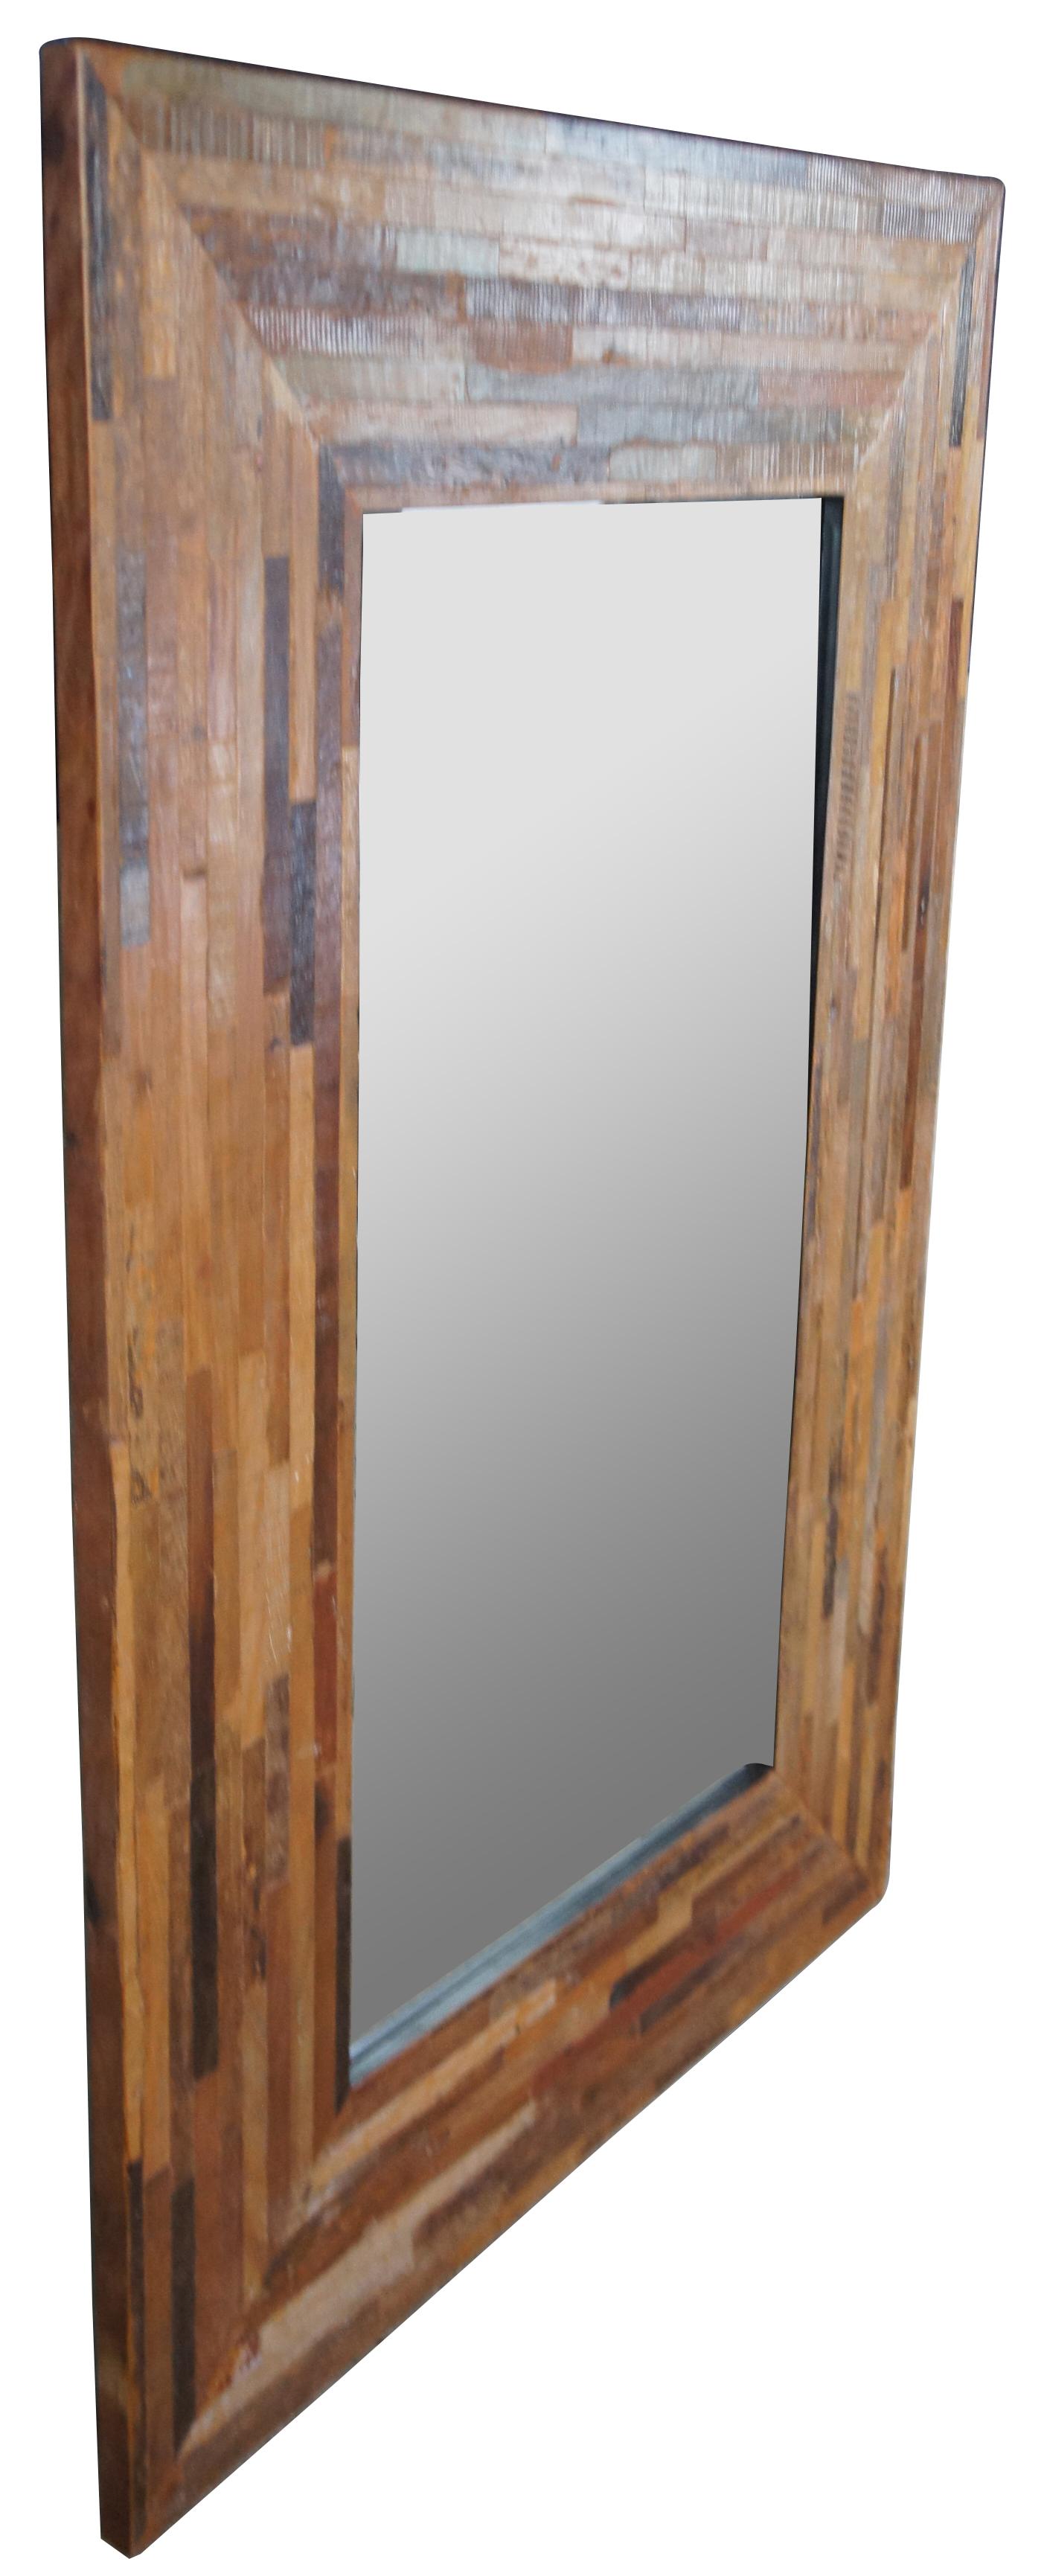 Rectangular driftwood floor or wall mirror. Features multicolor planked wood tones in geometric strips with beveled mirror. Can hang vertical or horizontal.
  